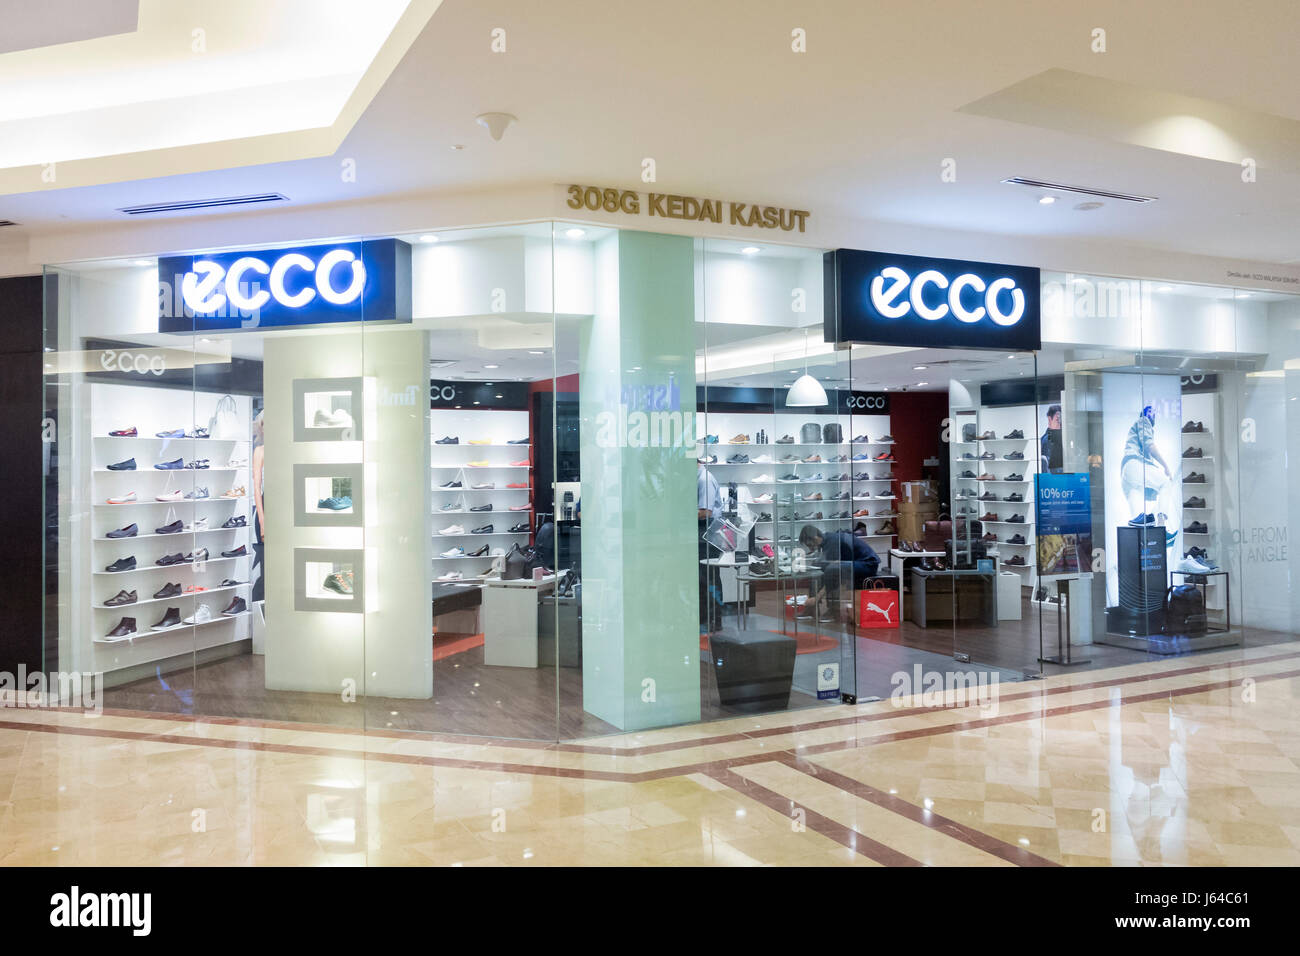 ECCO Shoe Manufacturer Logo Editorial Stock Photo - Image of brands,  offering: 114474863